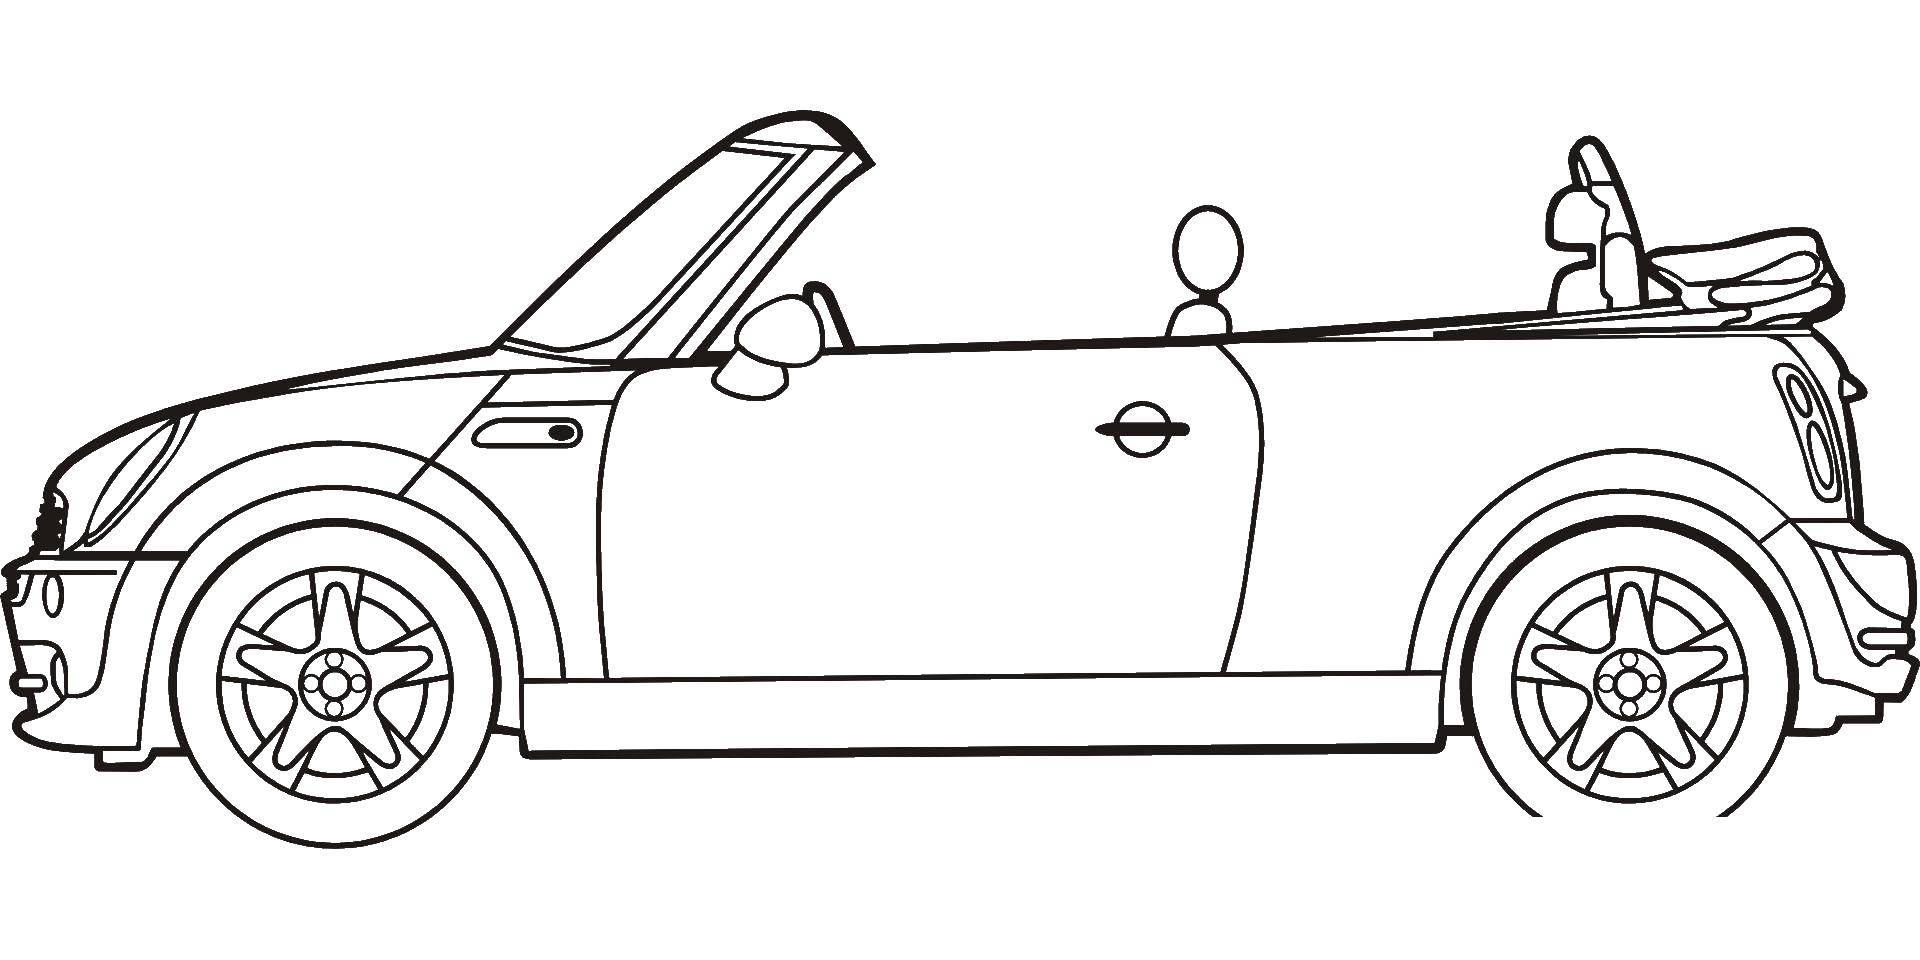 Coloring Convertible. Category machine . Tags:  convertible, cars.